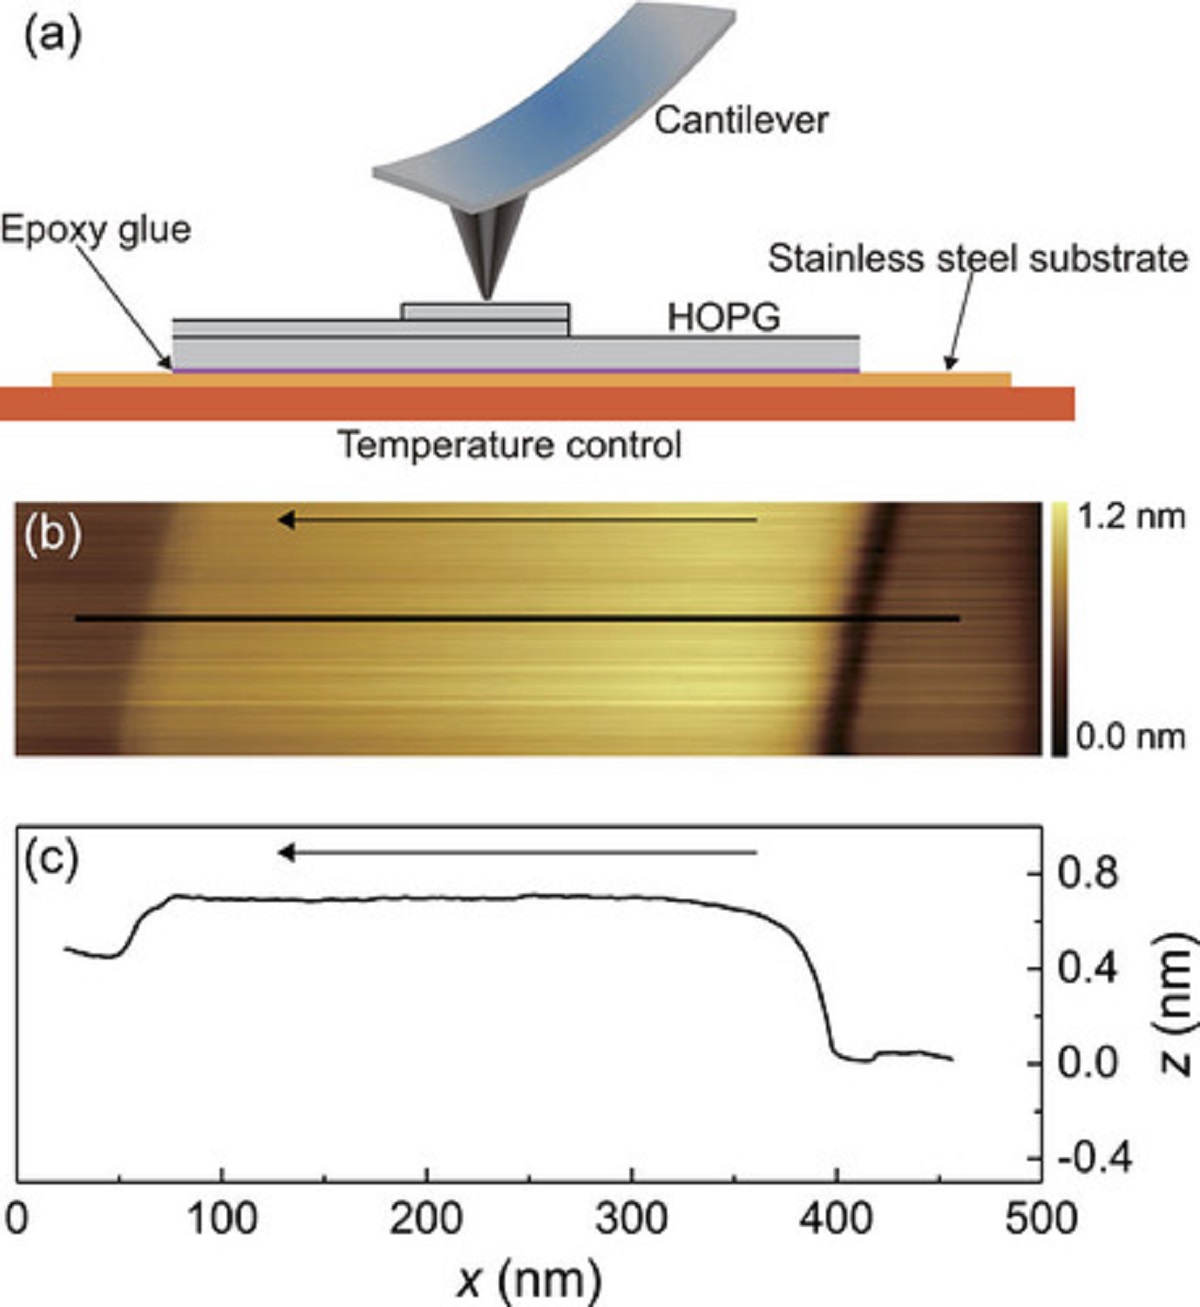 Figure 1 from “Temperature effects on the nano-friction across exposed atomic step edges” by Wen Wang et al.:
 Experimental setup and the topographic image of the HOPG surface with step edges used in our measurements. (a) Illustration of the experimental setup. All experiments have been performed using a conventional friction force microscope on a freshly cleaved HOPG sample which was in contact with the temperature control stage under UHV conditions. (b) The typical topographic image of the HOPG surface with a single- and double-layer step edge obtained at T = 297.7 K using the contact mode operation with an applied normal force of 13.1 nN and a scan velocity of 1.25 μm/s. (c) The cross-section height profile across the step edges highlighted in (b). The black arrows in (b) and (c) indicate the scanning direction.  NANOSENSORS PointProbe Plus PPP-LFMR AFM probes for lateral force microscopy and friction force microscopy were used.